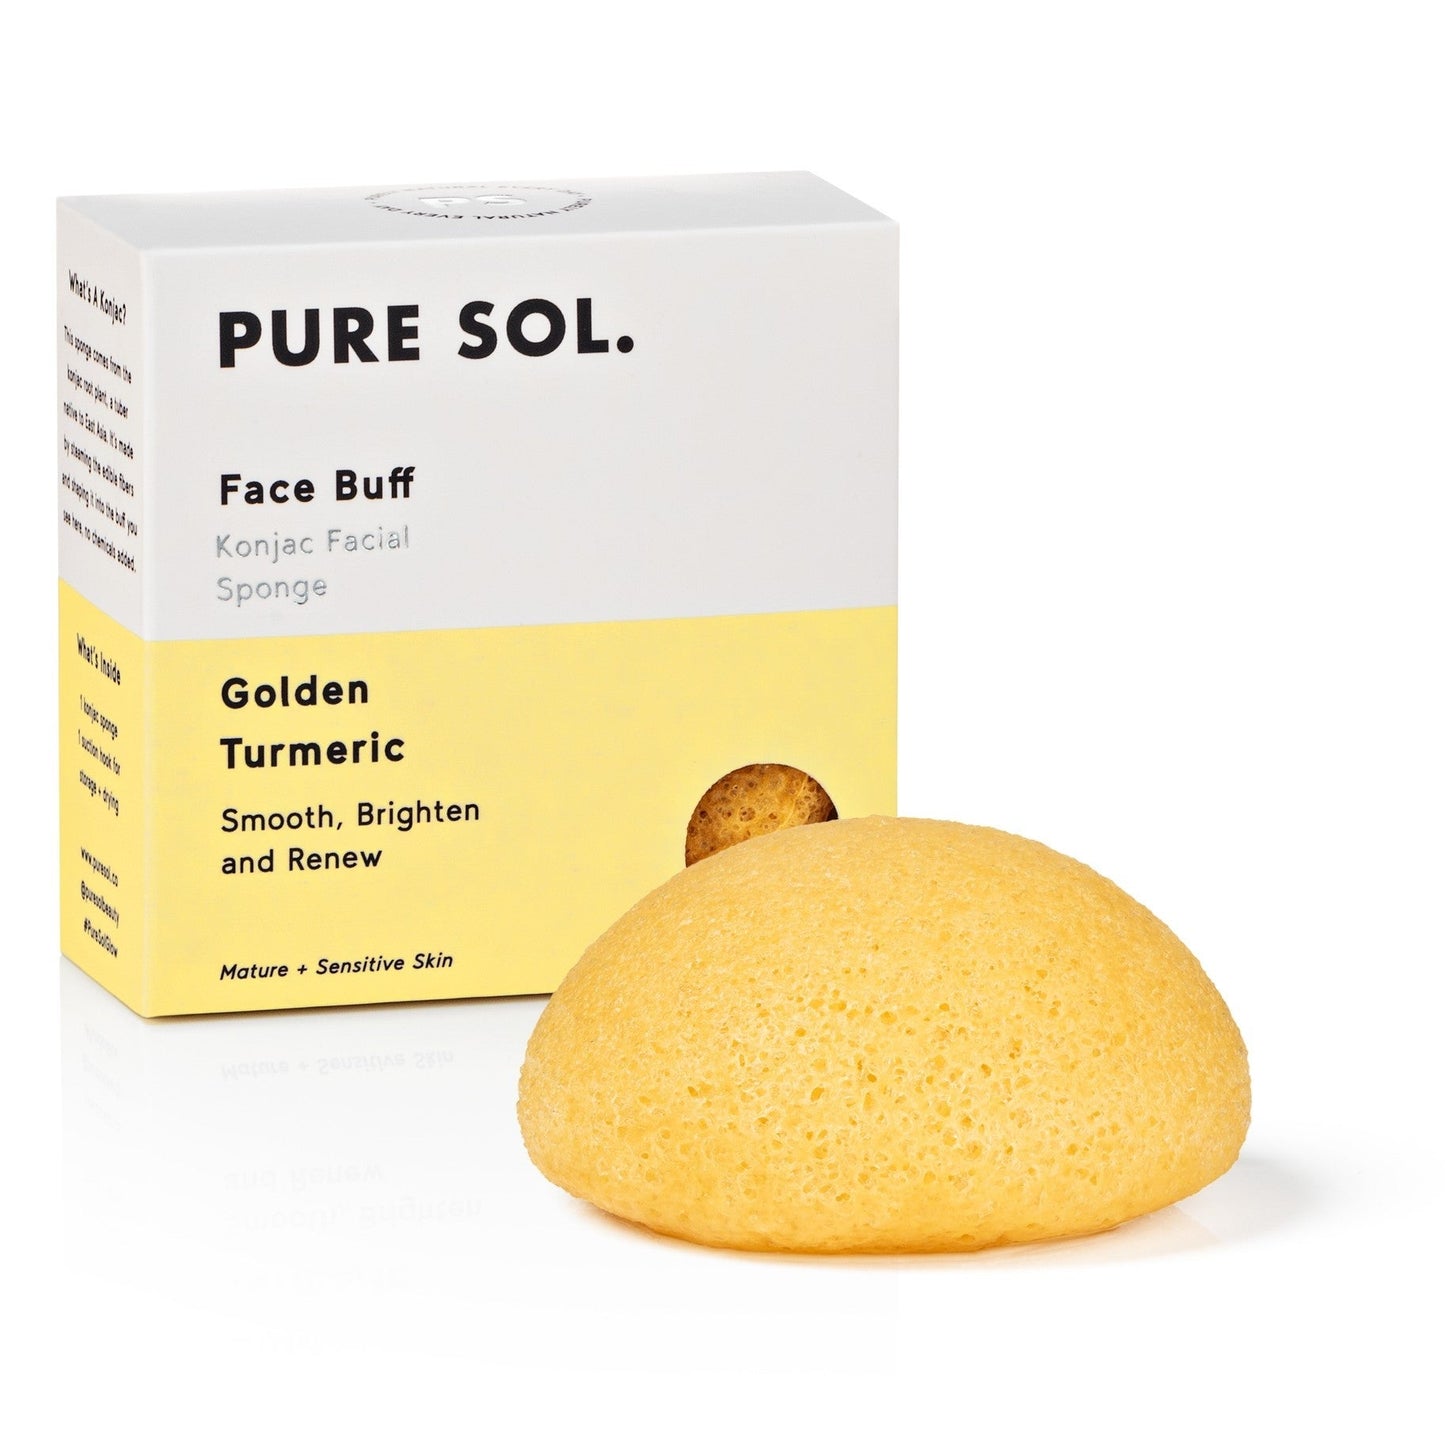 Face Buff by Pure Sol